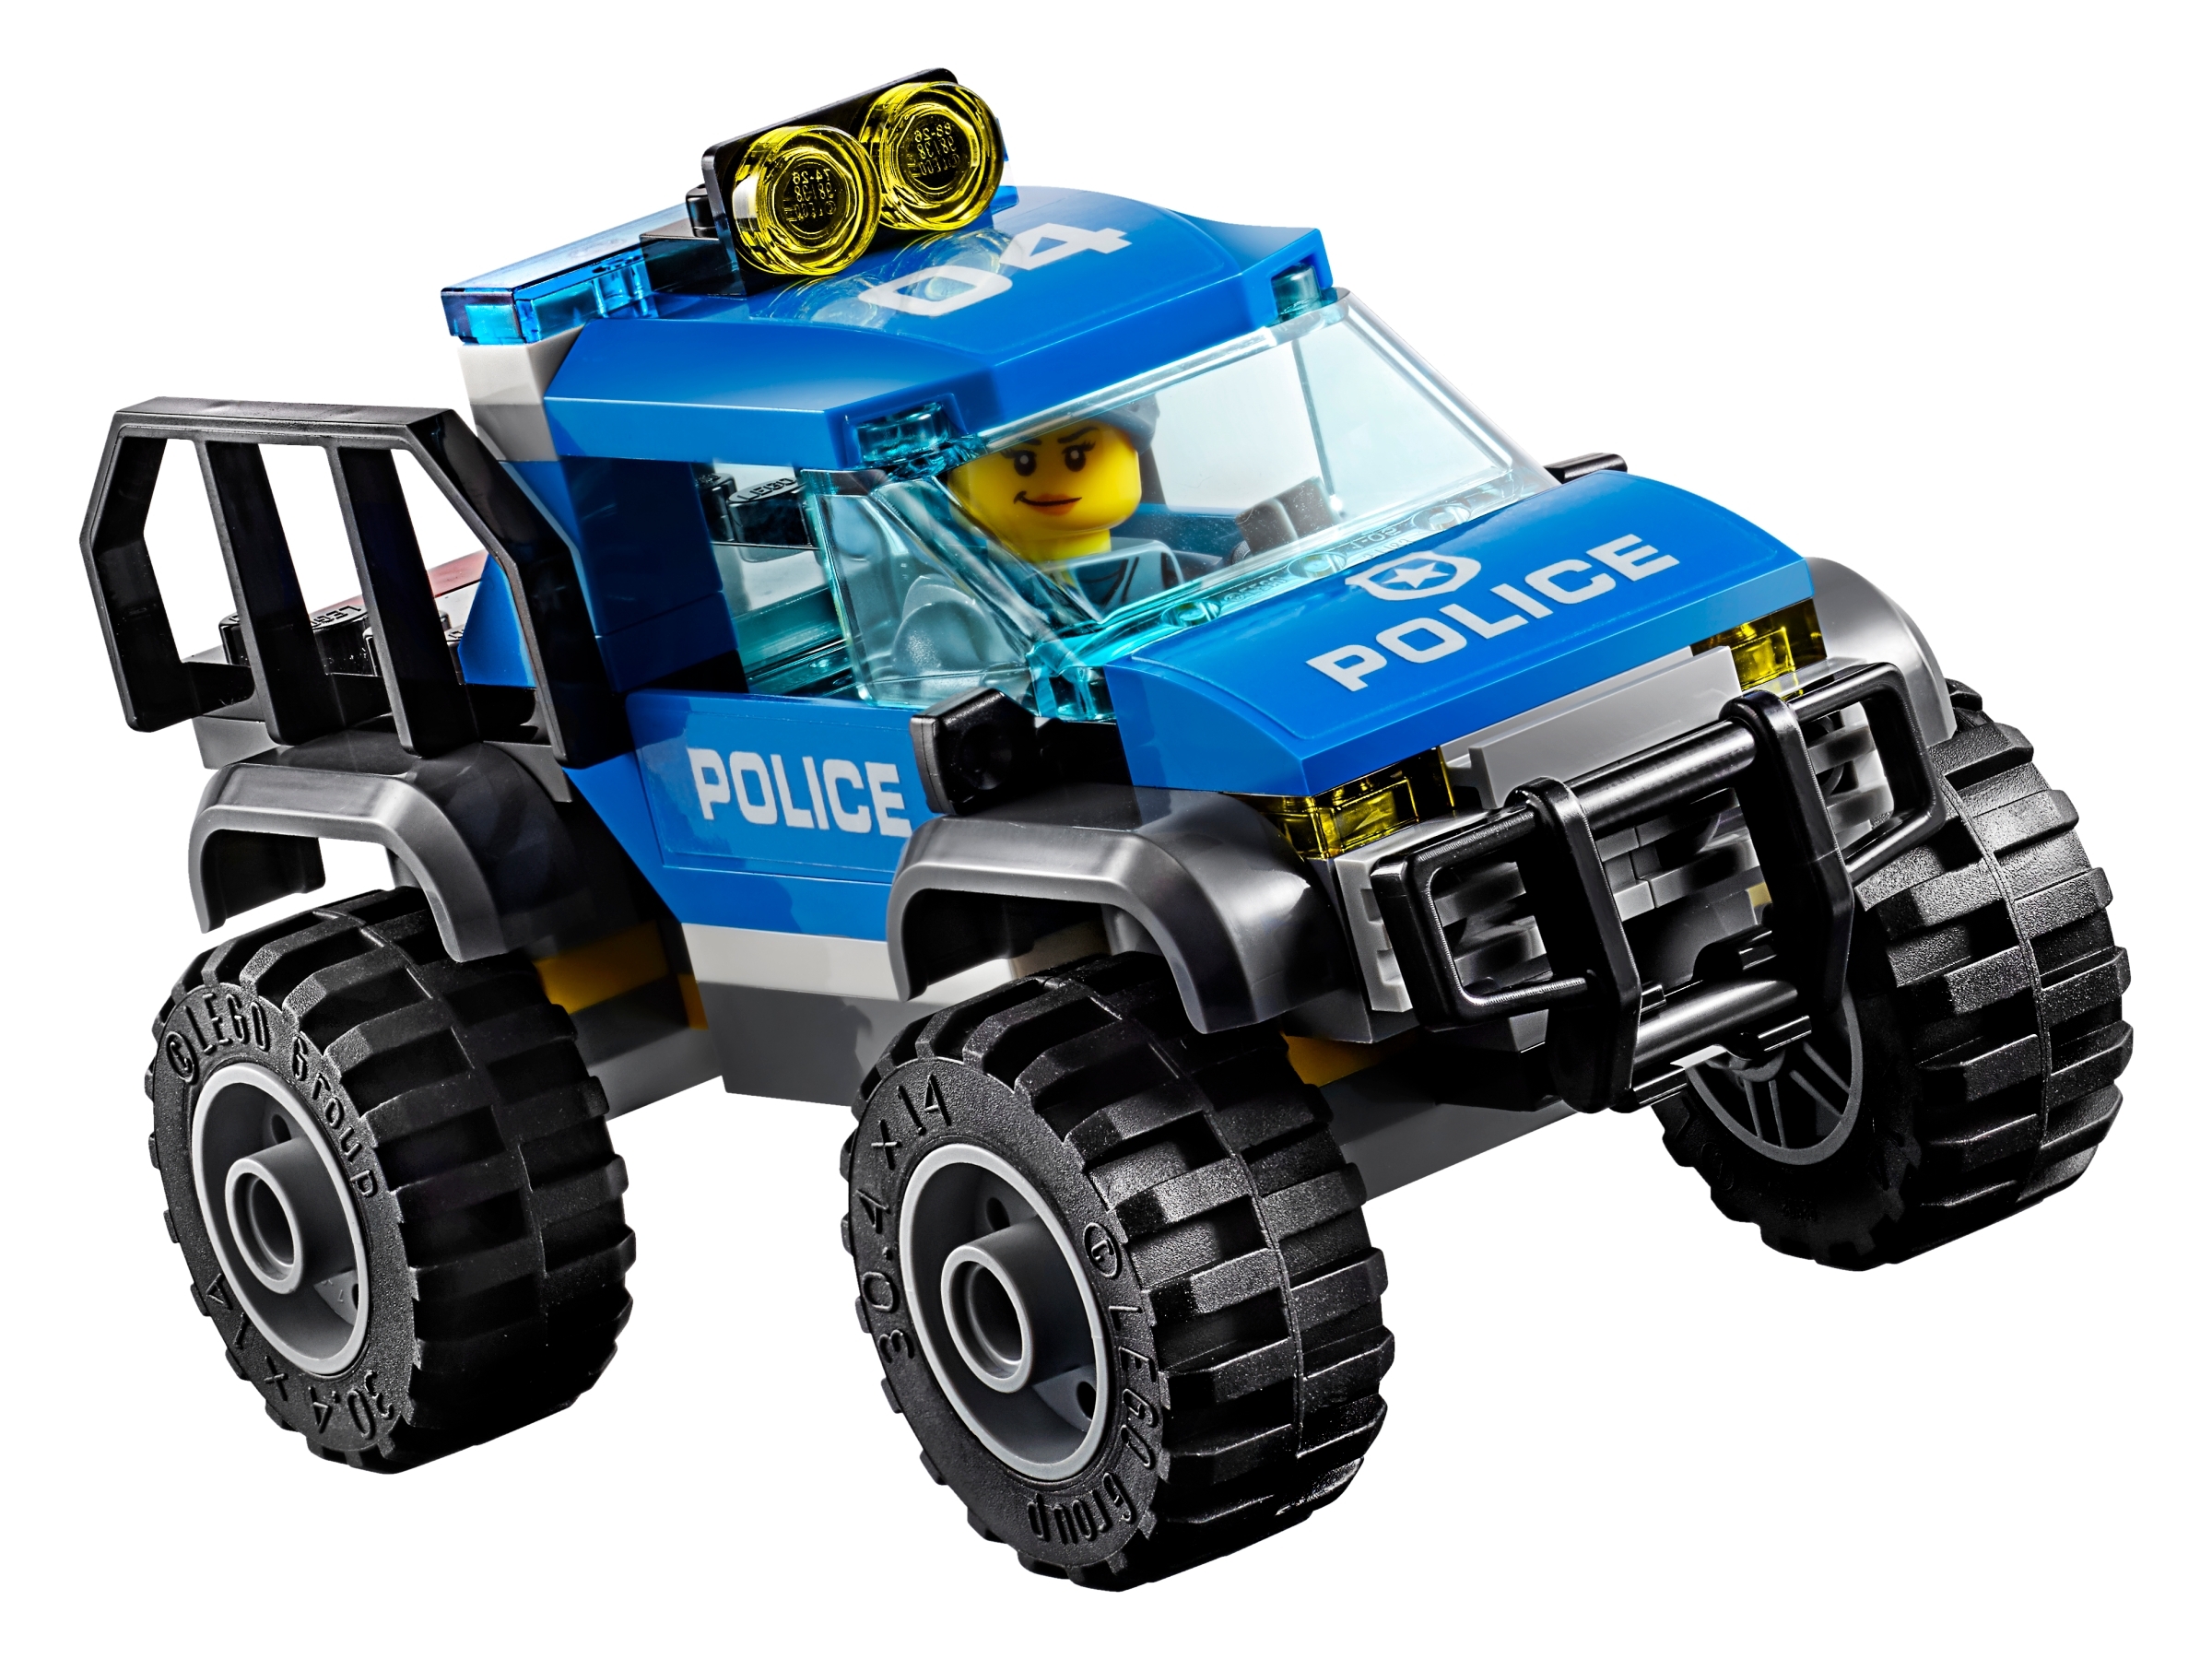 Mountain Police Headquarters | | Buy online at the Official LEGO® Shop US